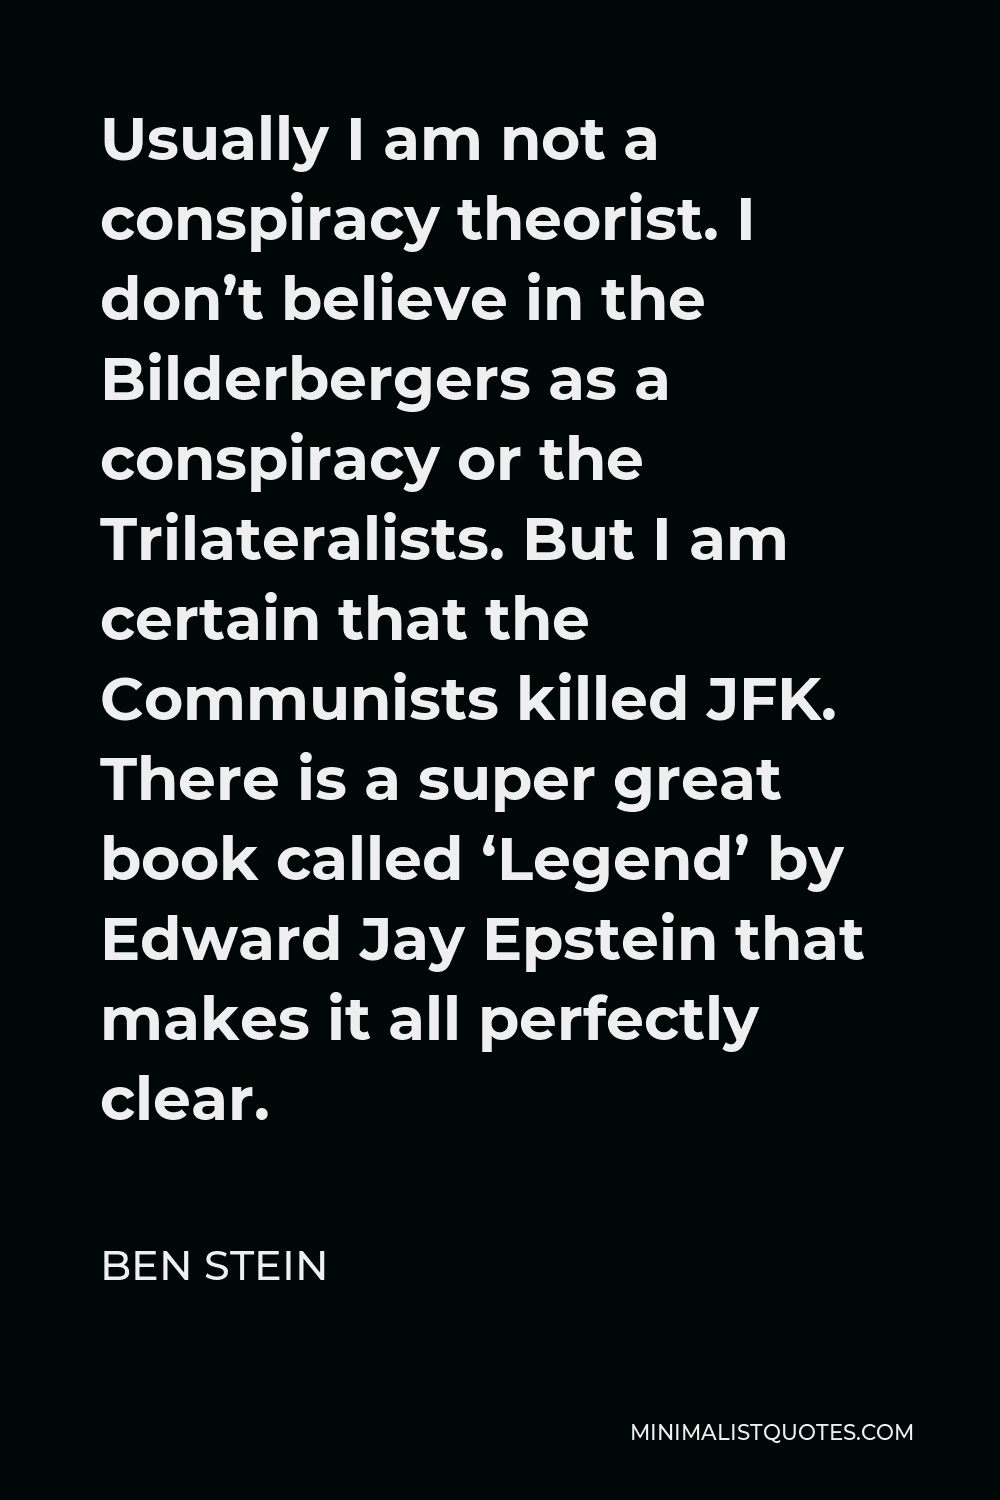 Ben Stein Quote - Usually I am not a conspiracy theorist. I don’t believe in the Bilderbergers as a conspiracy or the Trilateralists. But I am certain that the Communists killed JFK. There is a super great book called ‘Legend’ by Edward Jay Epstein that makes it all perfectly clear.